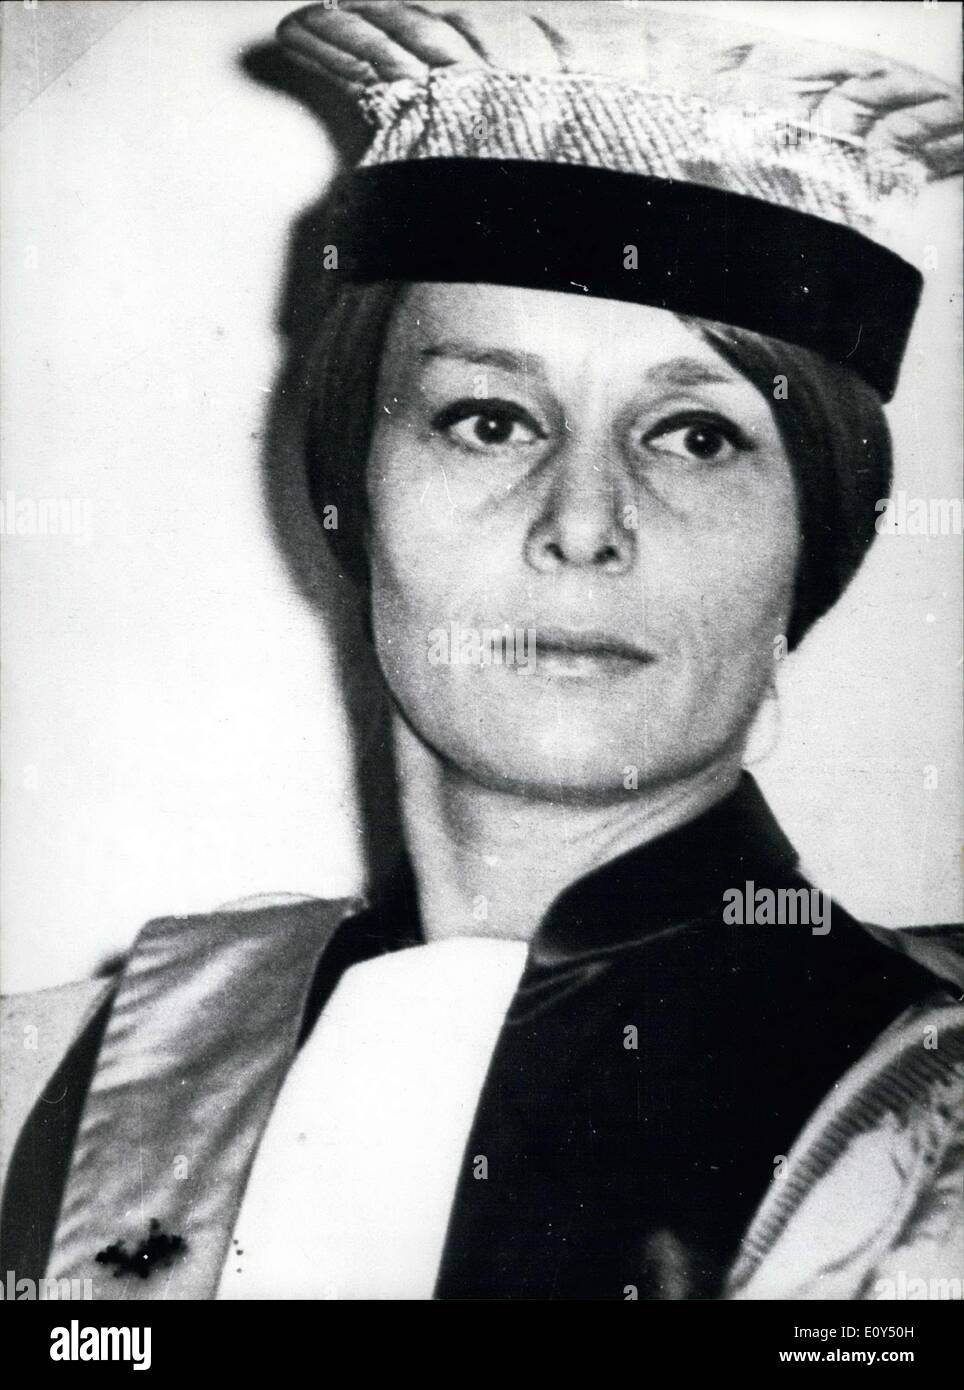 Nov. 05, 1968 - Aline Picard (pictured) was elected dean of the Arts and Humanities Department at Brest. Aline Picard who has been at the head of the literary college of this university since 1966. Stock Photo